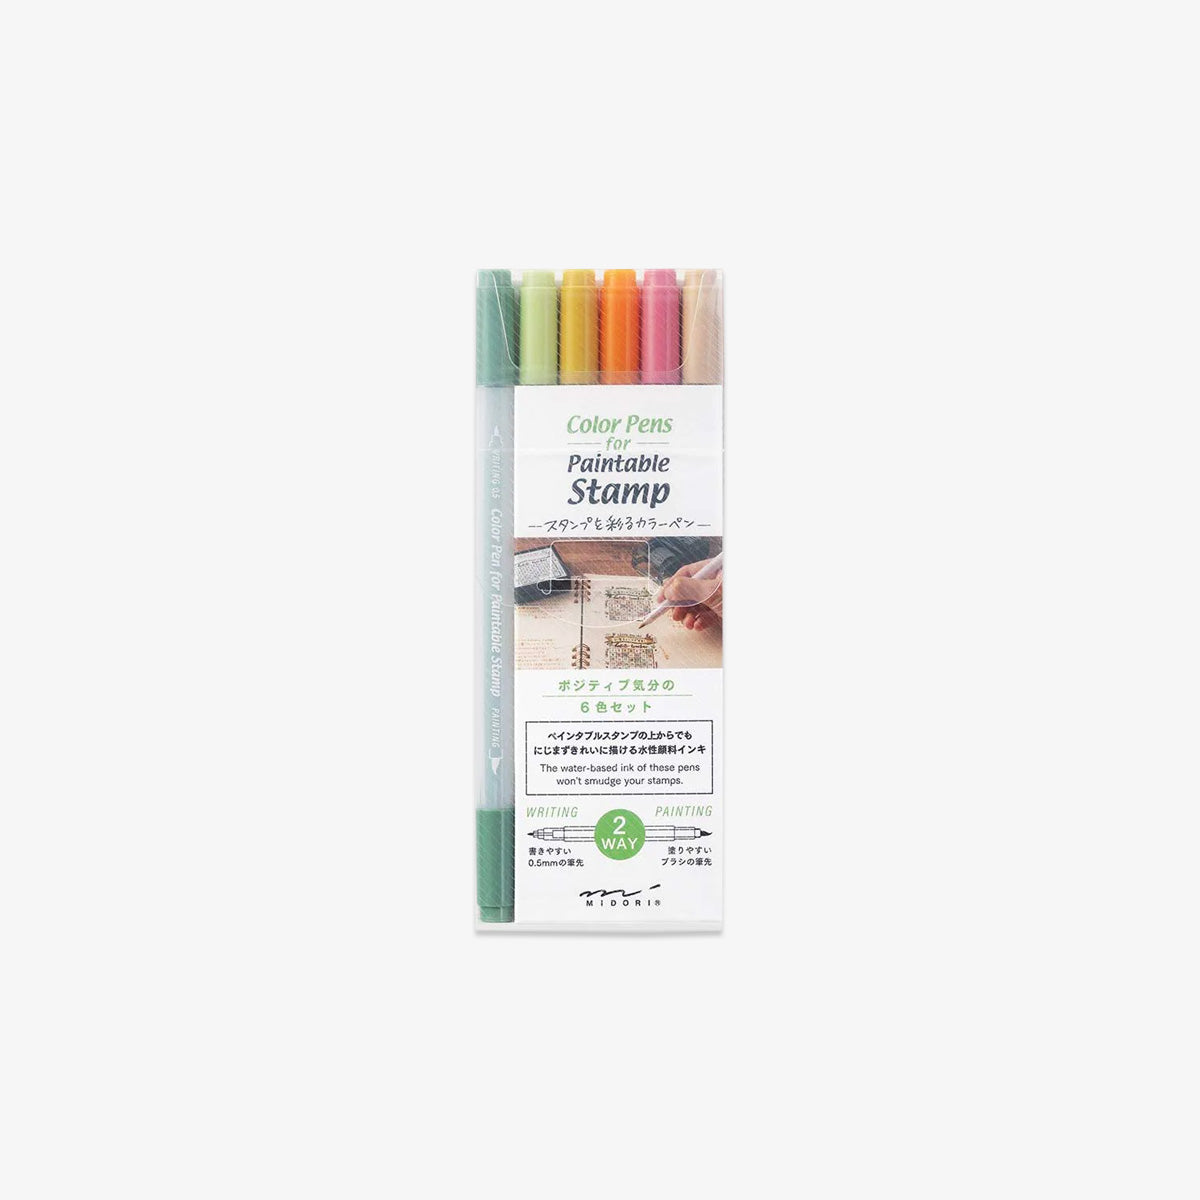 COLOR PENS FOR PAINTABLE STAMP // SET OF 6